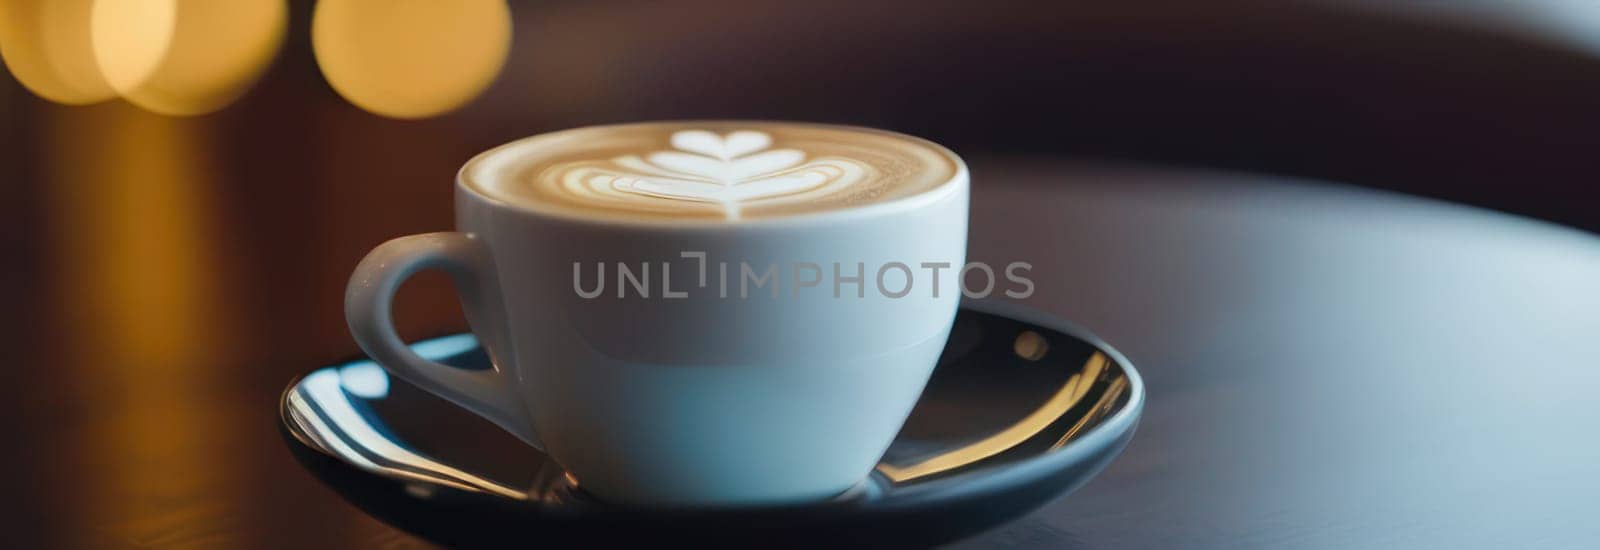 Cup of hot coffee on dark background.Long photo banner for website header design with copy space. Cafe menu concept idea background. by Angelsmoon